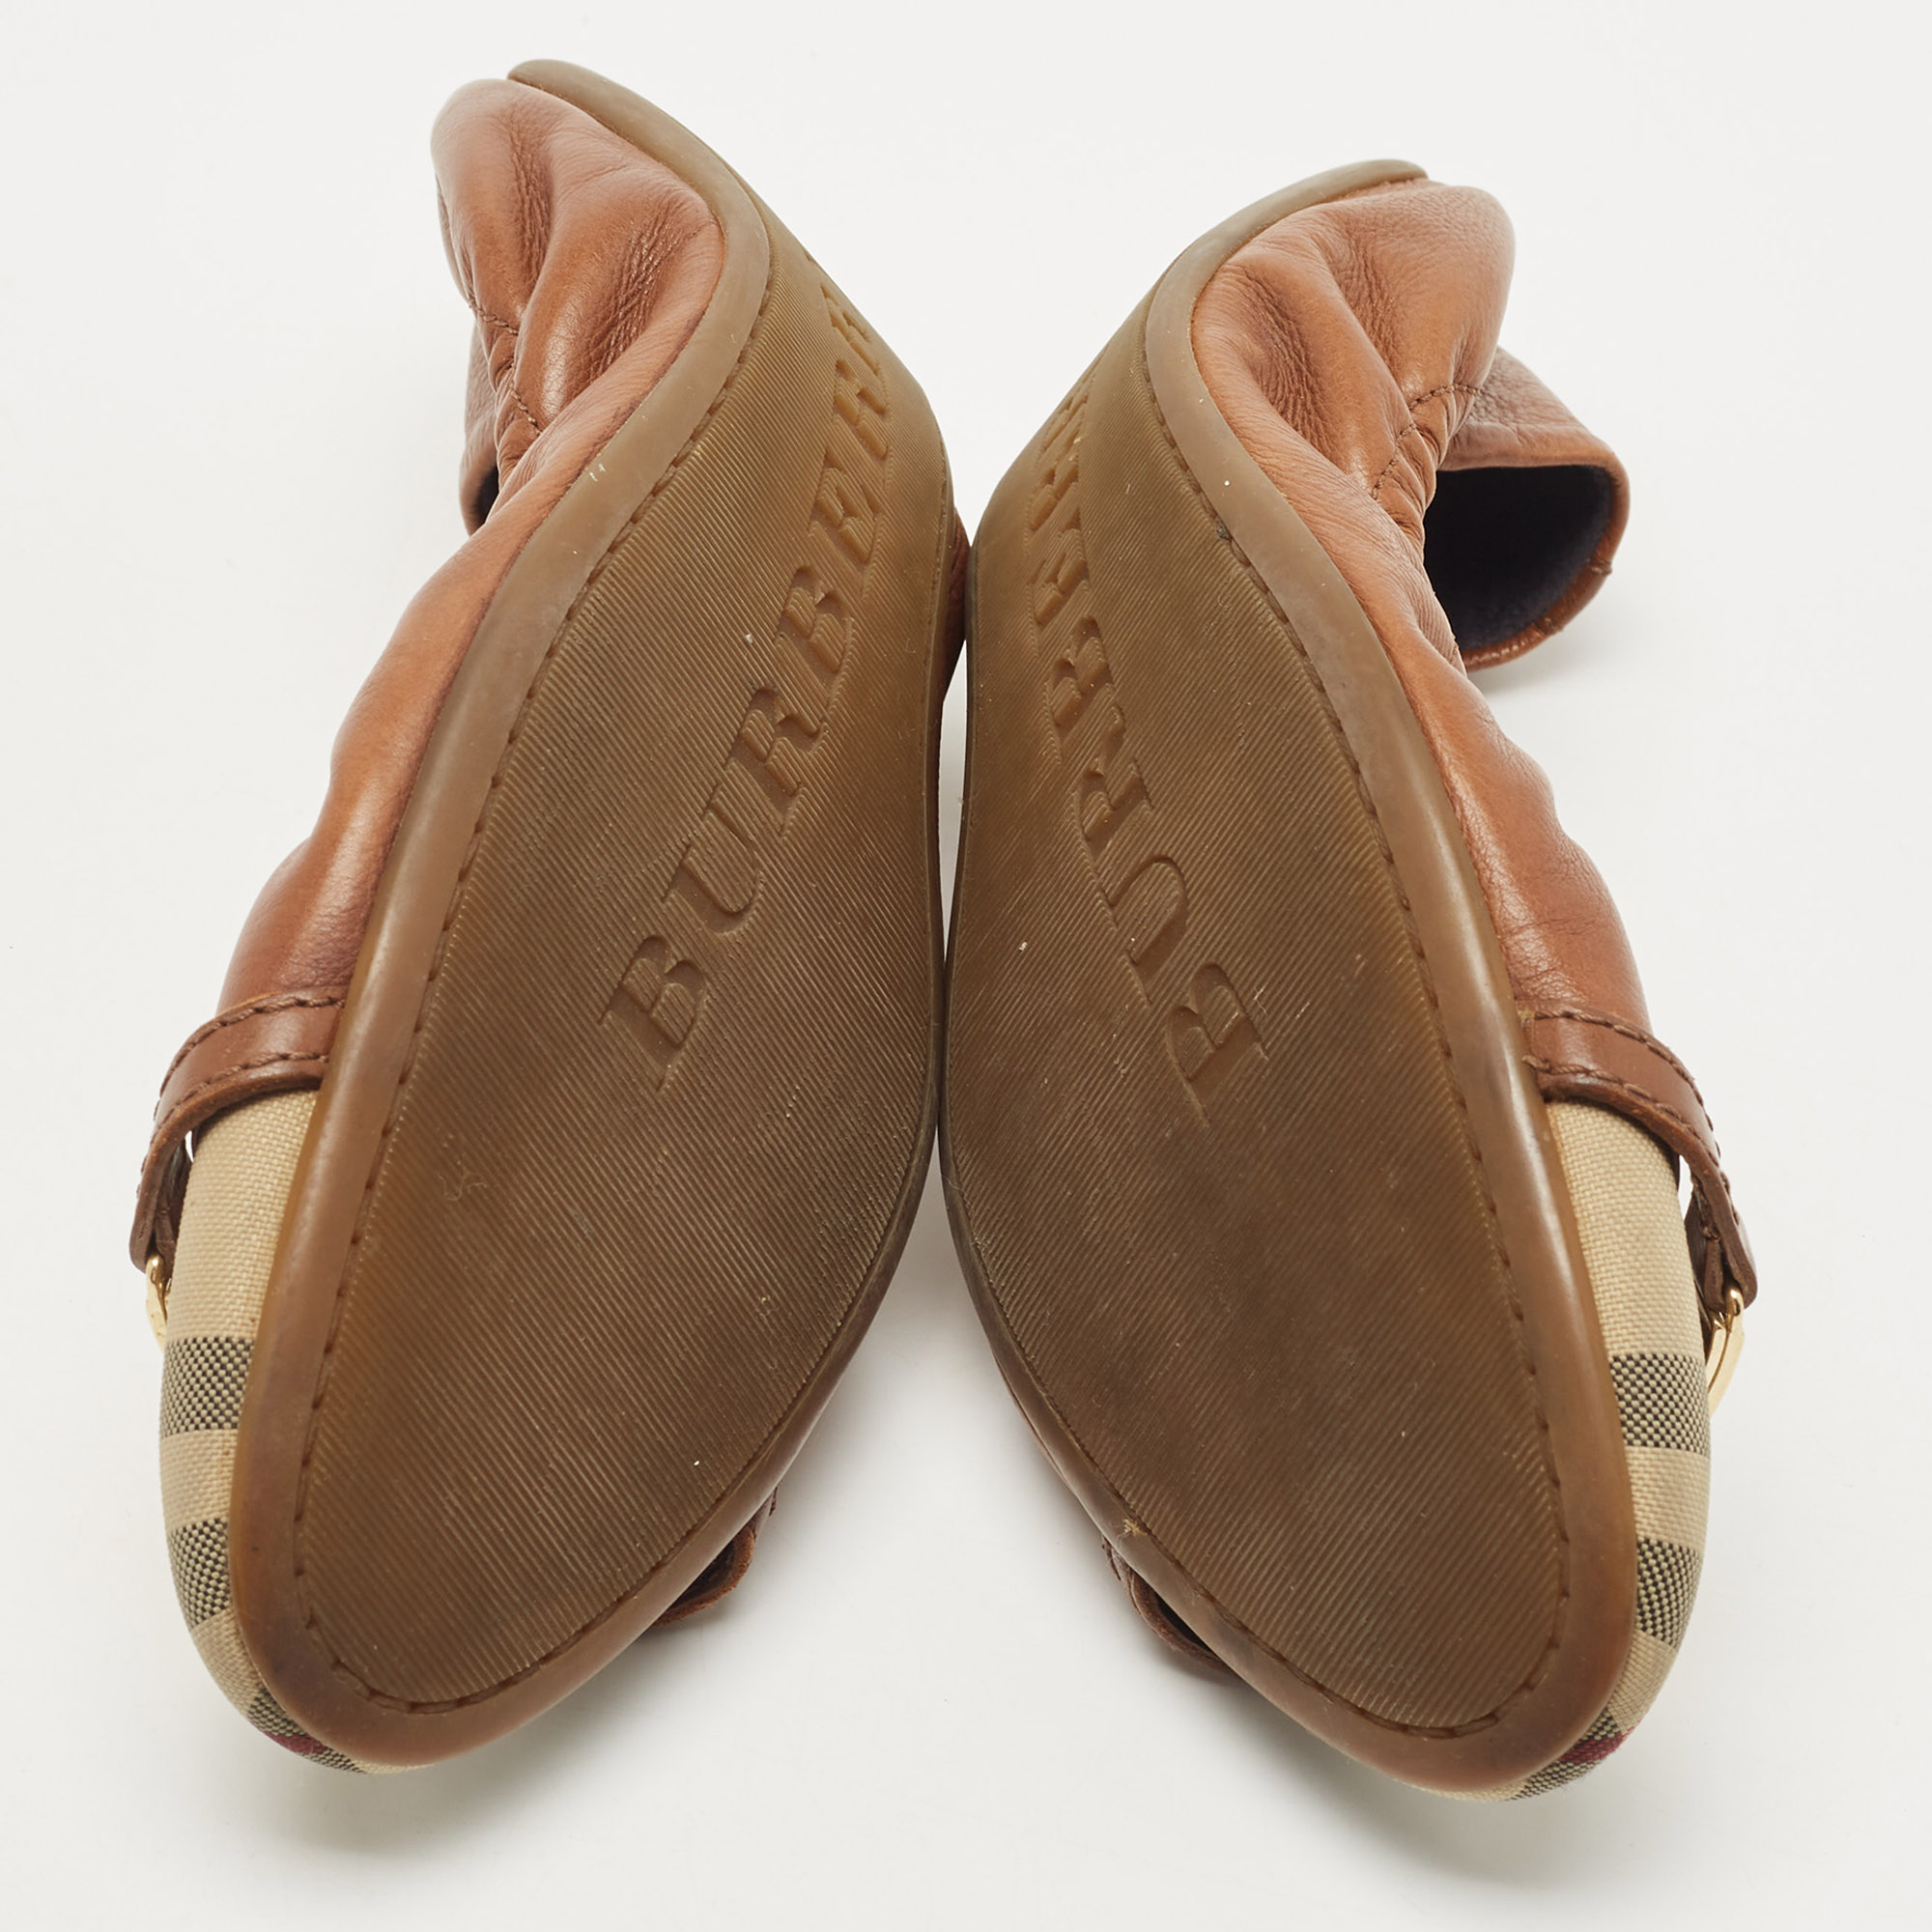 Burberry Brown Nova Check Canvas And Leather Twistlock Scrunch Ballet Flats Size 41